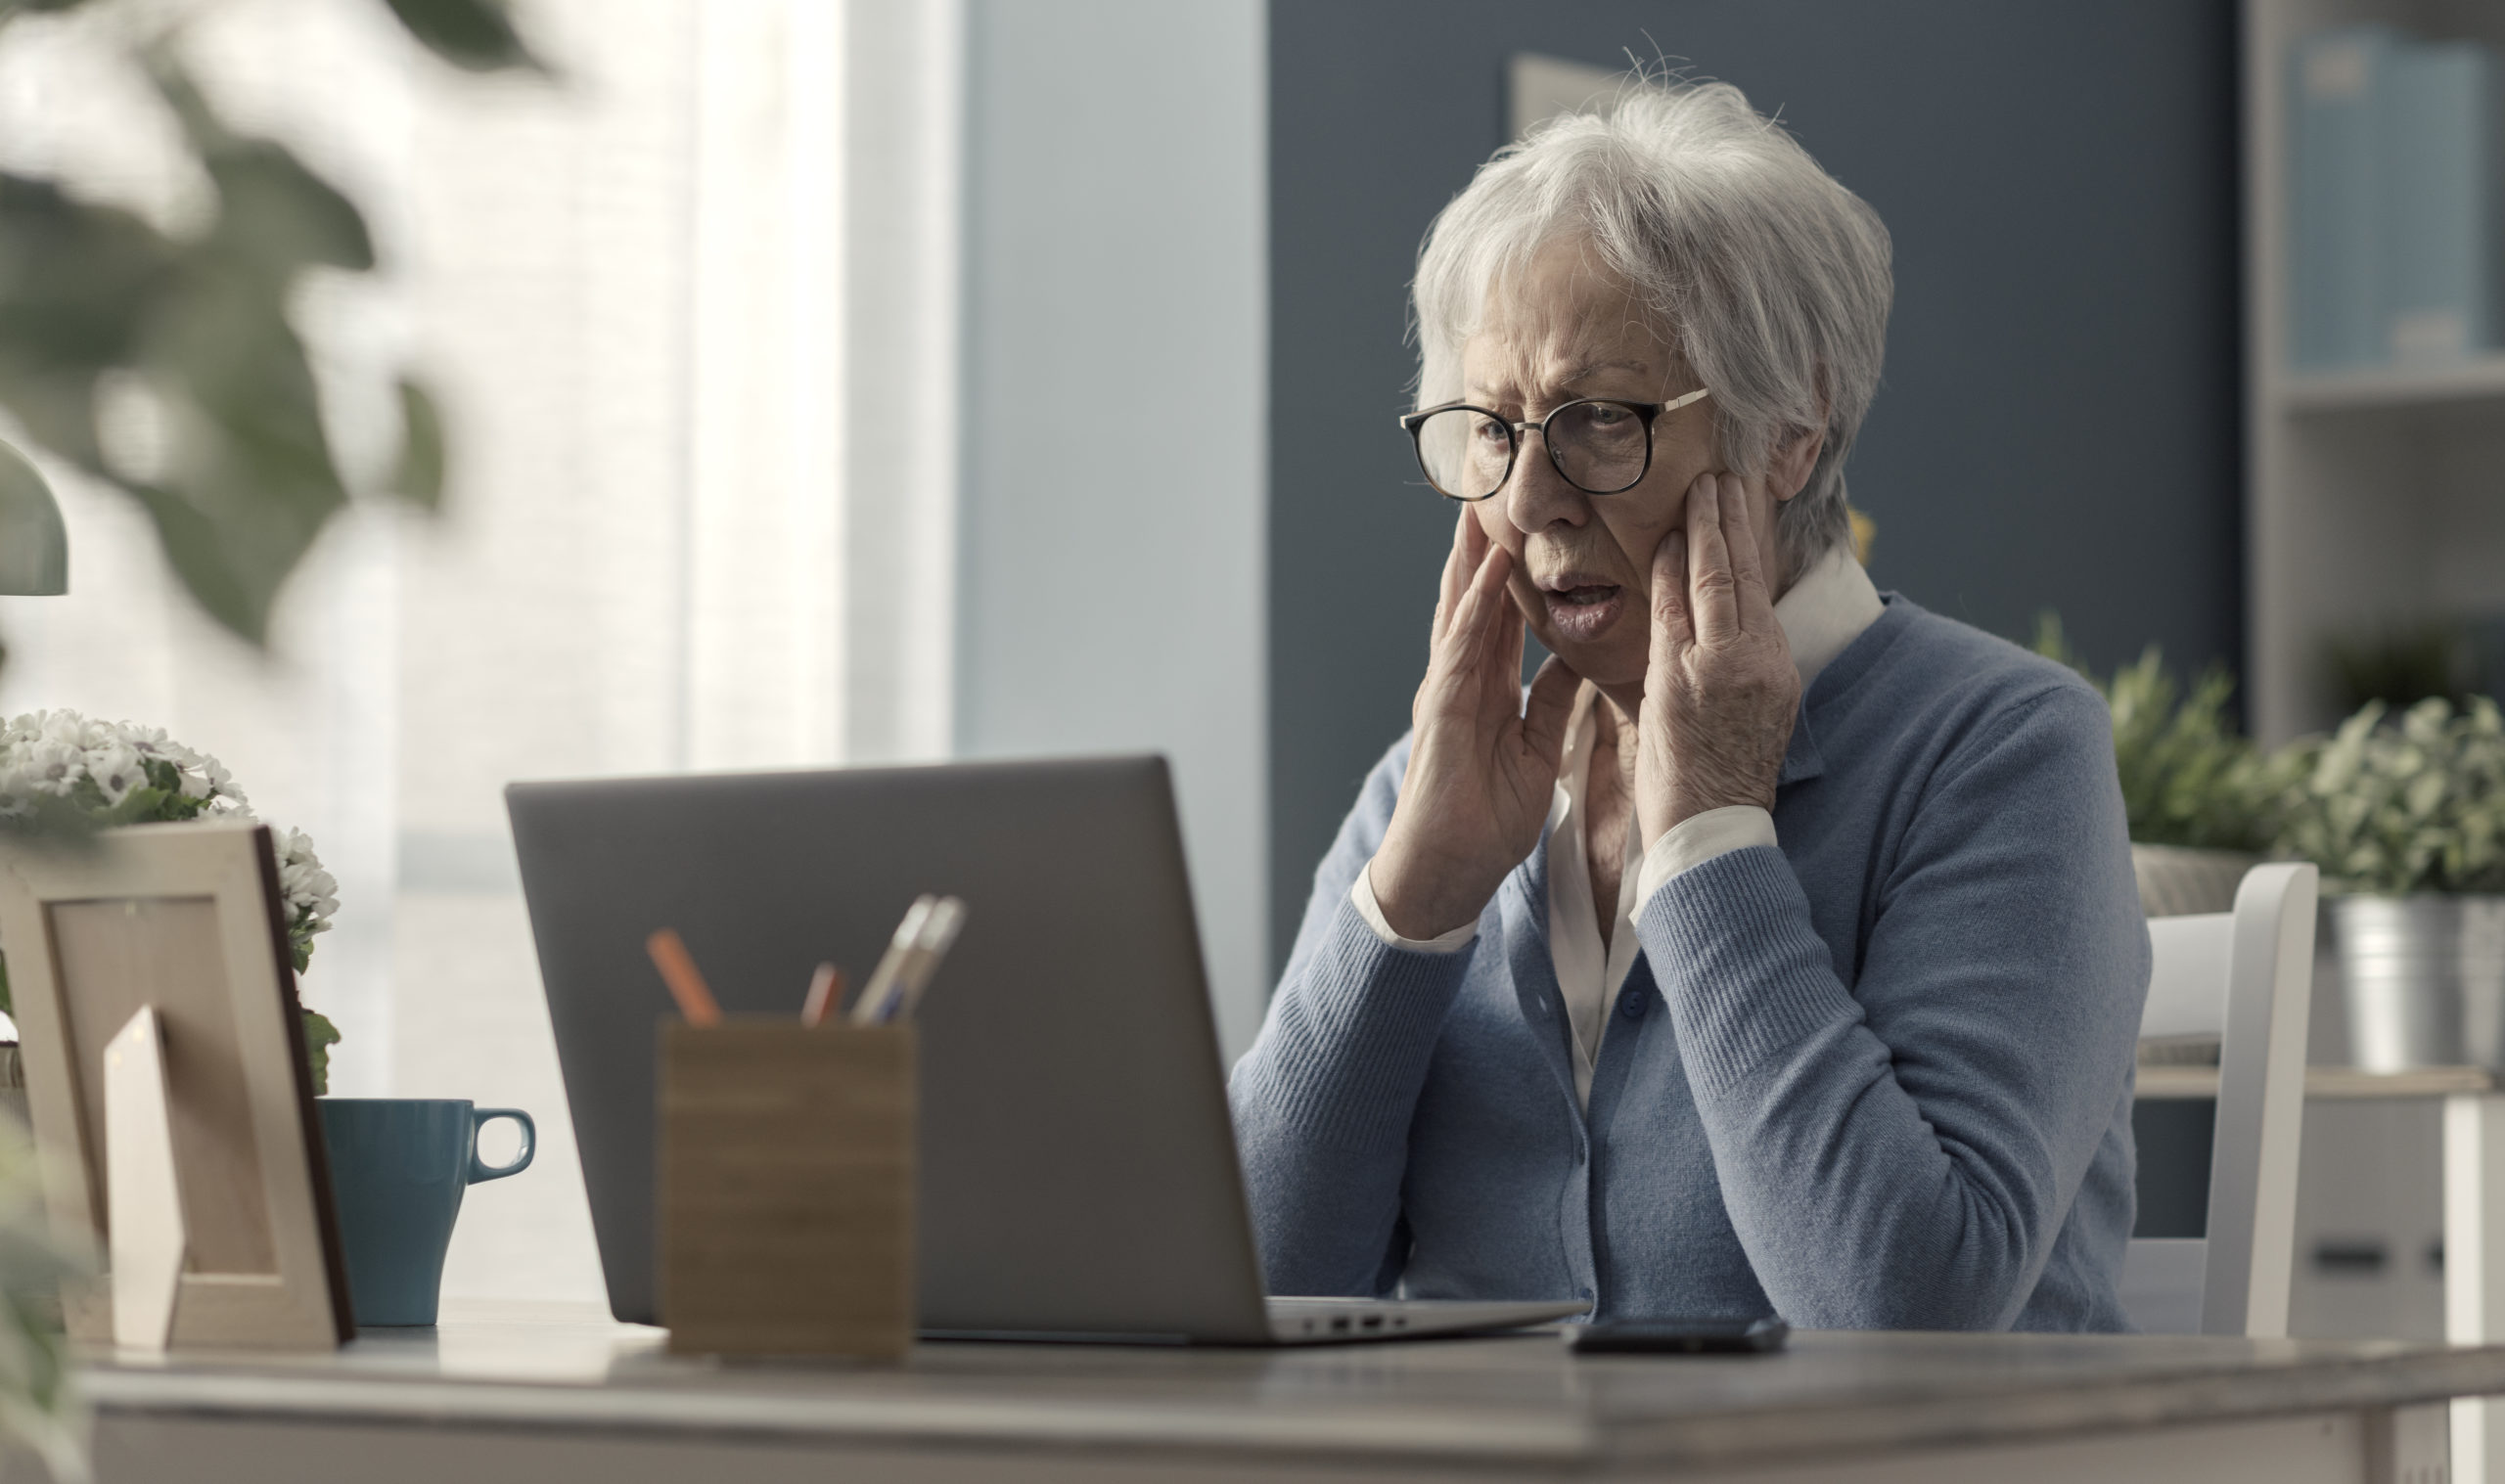 Senior woman struggling with technology, she is confused and staring at the computer screen